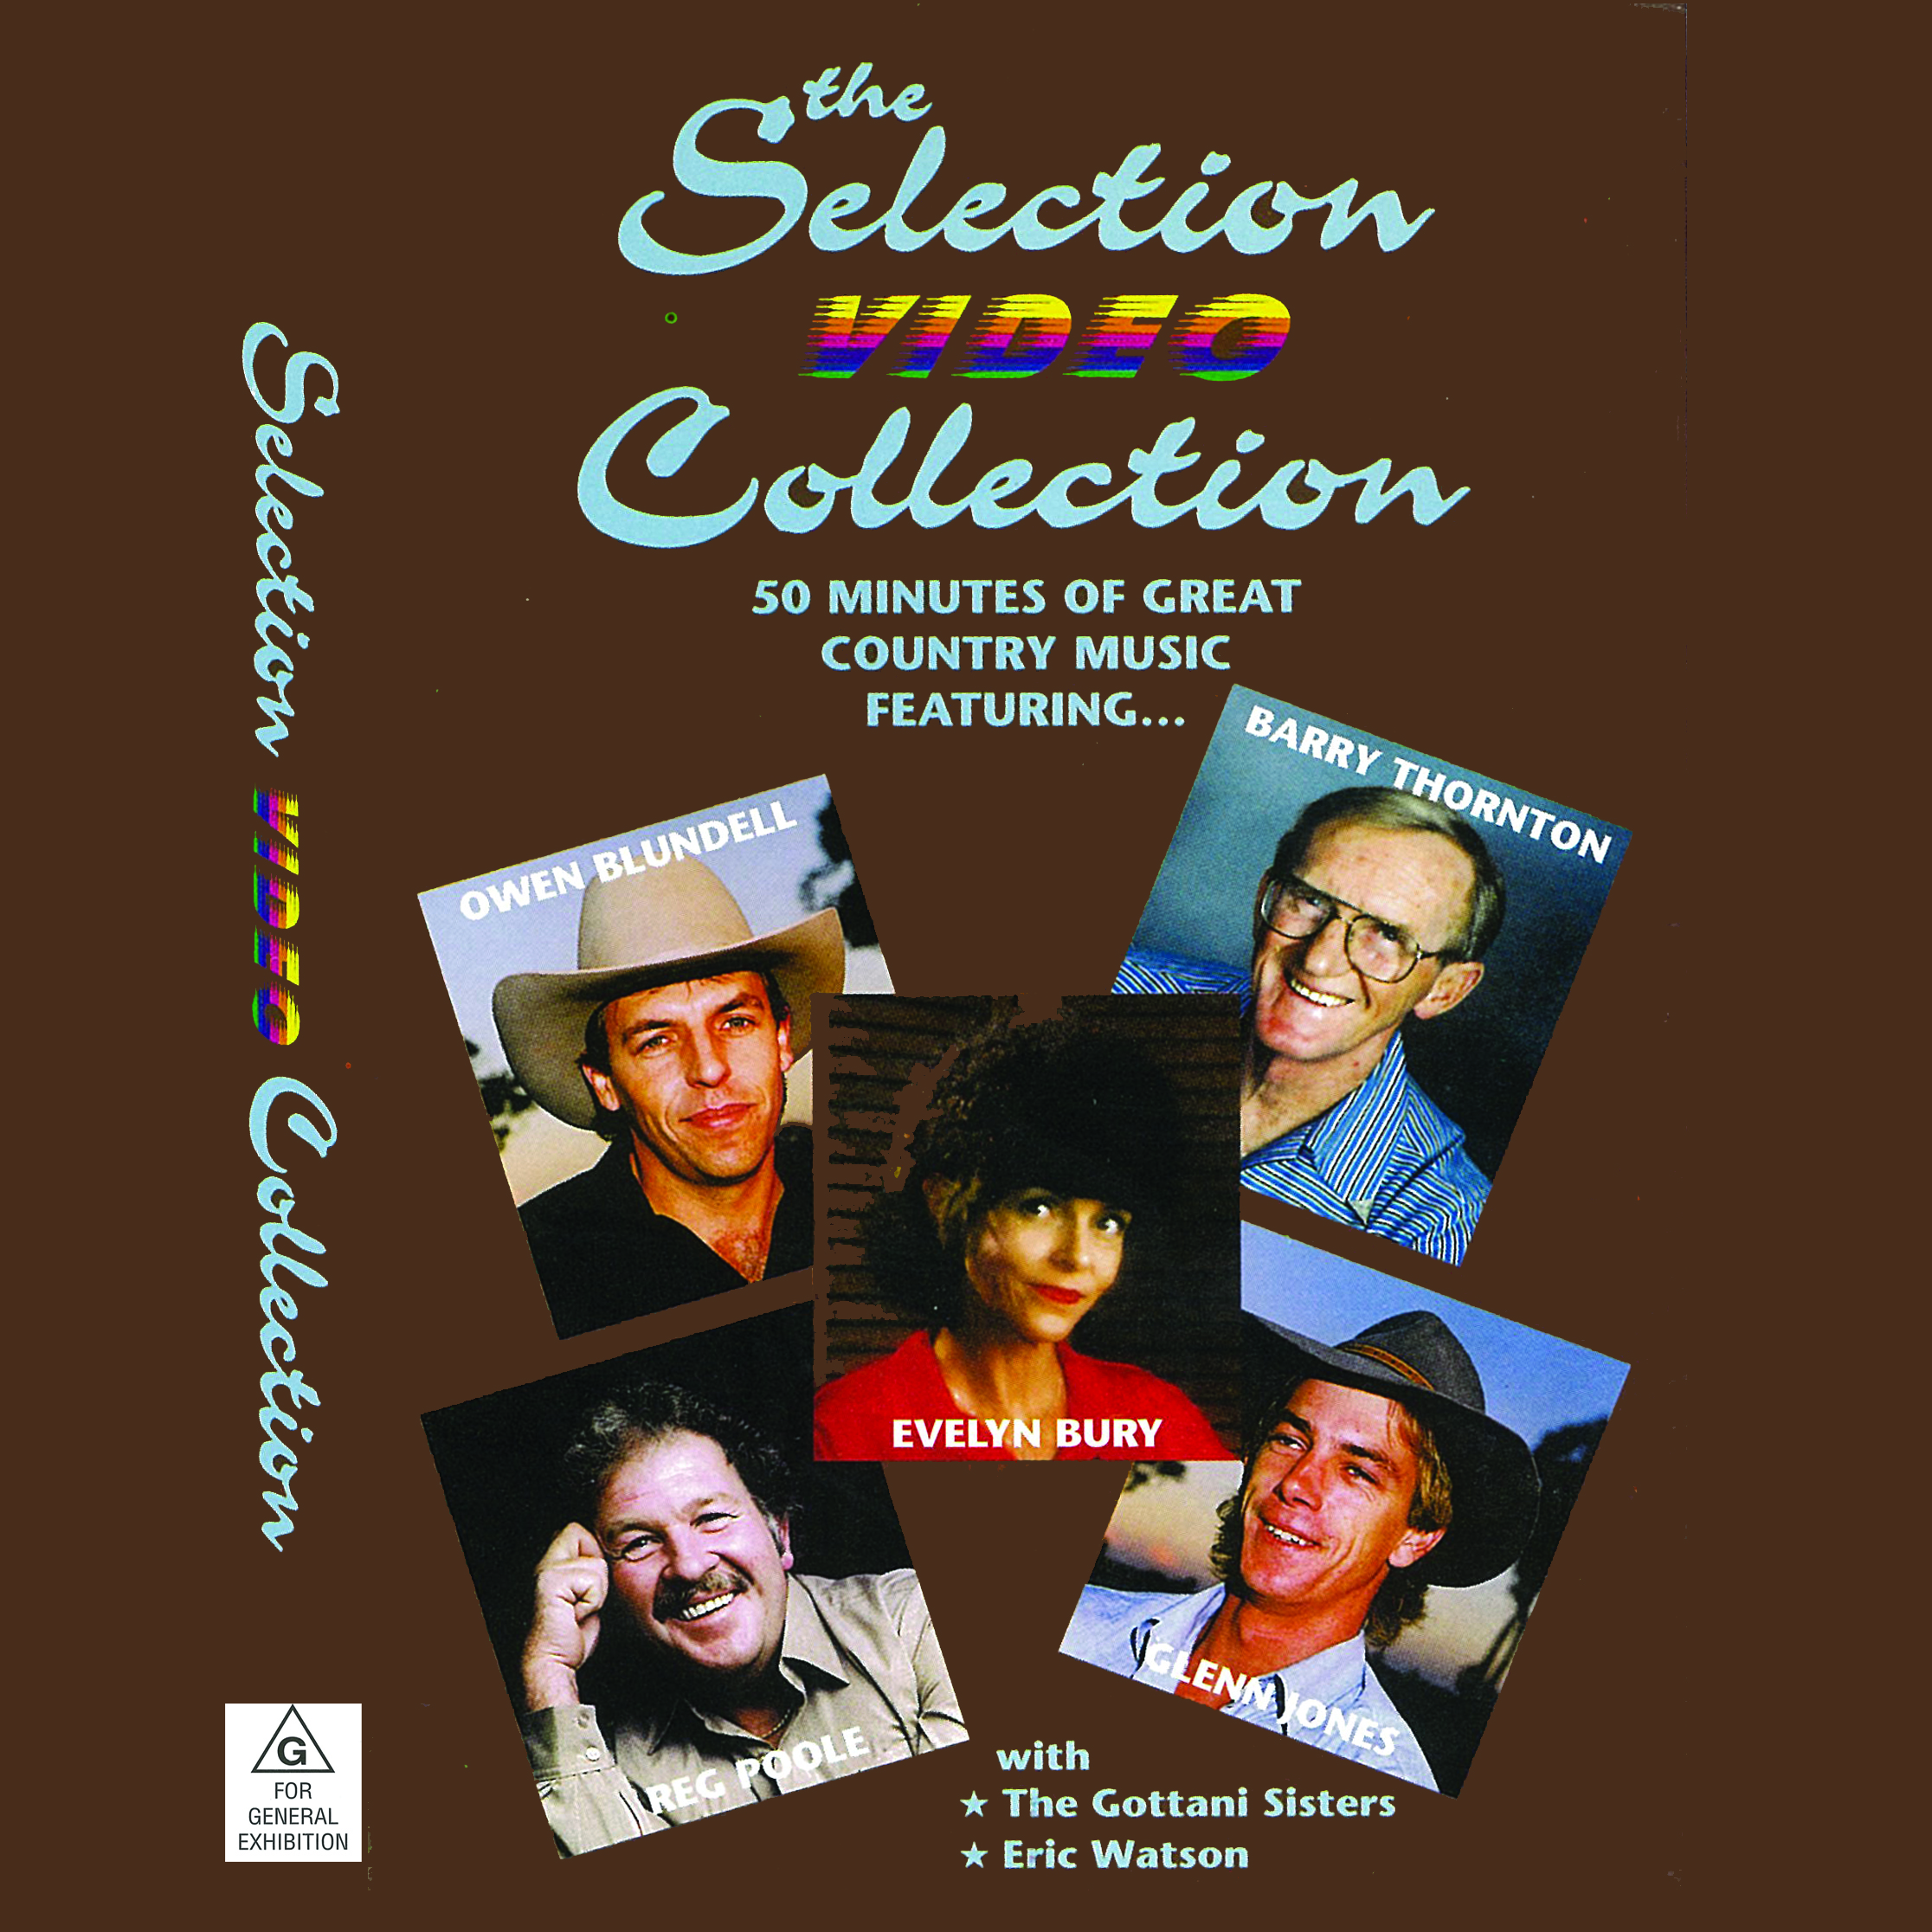 REG POOLE - SELECTION COLLECTION